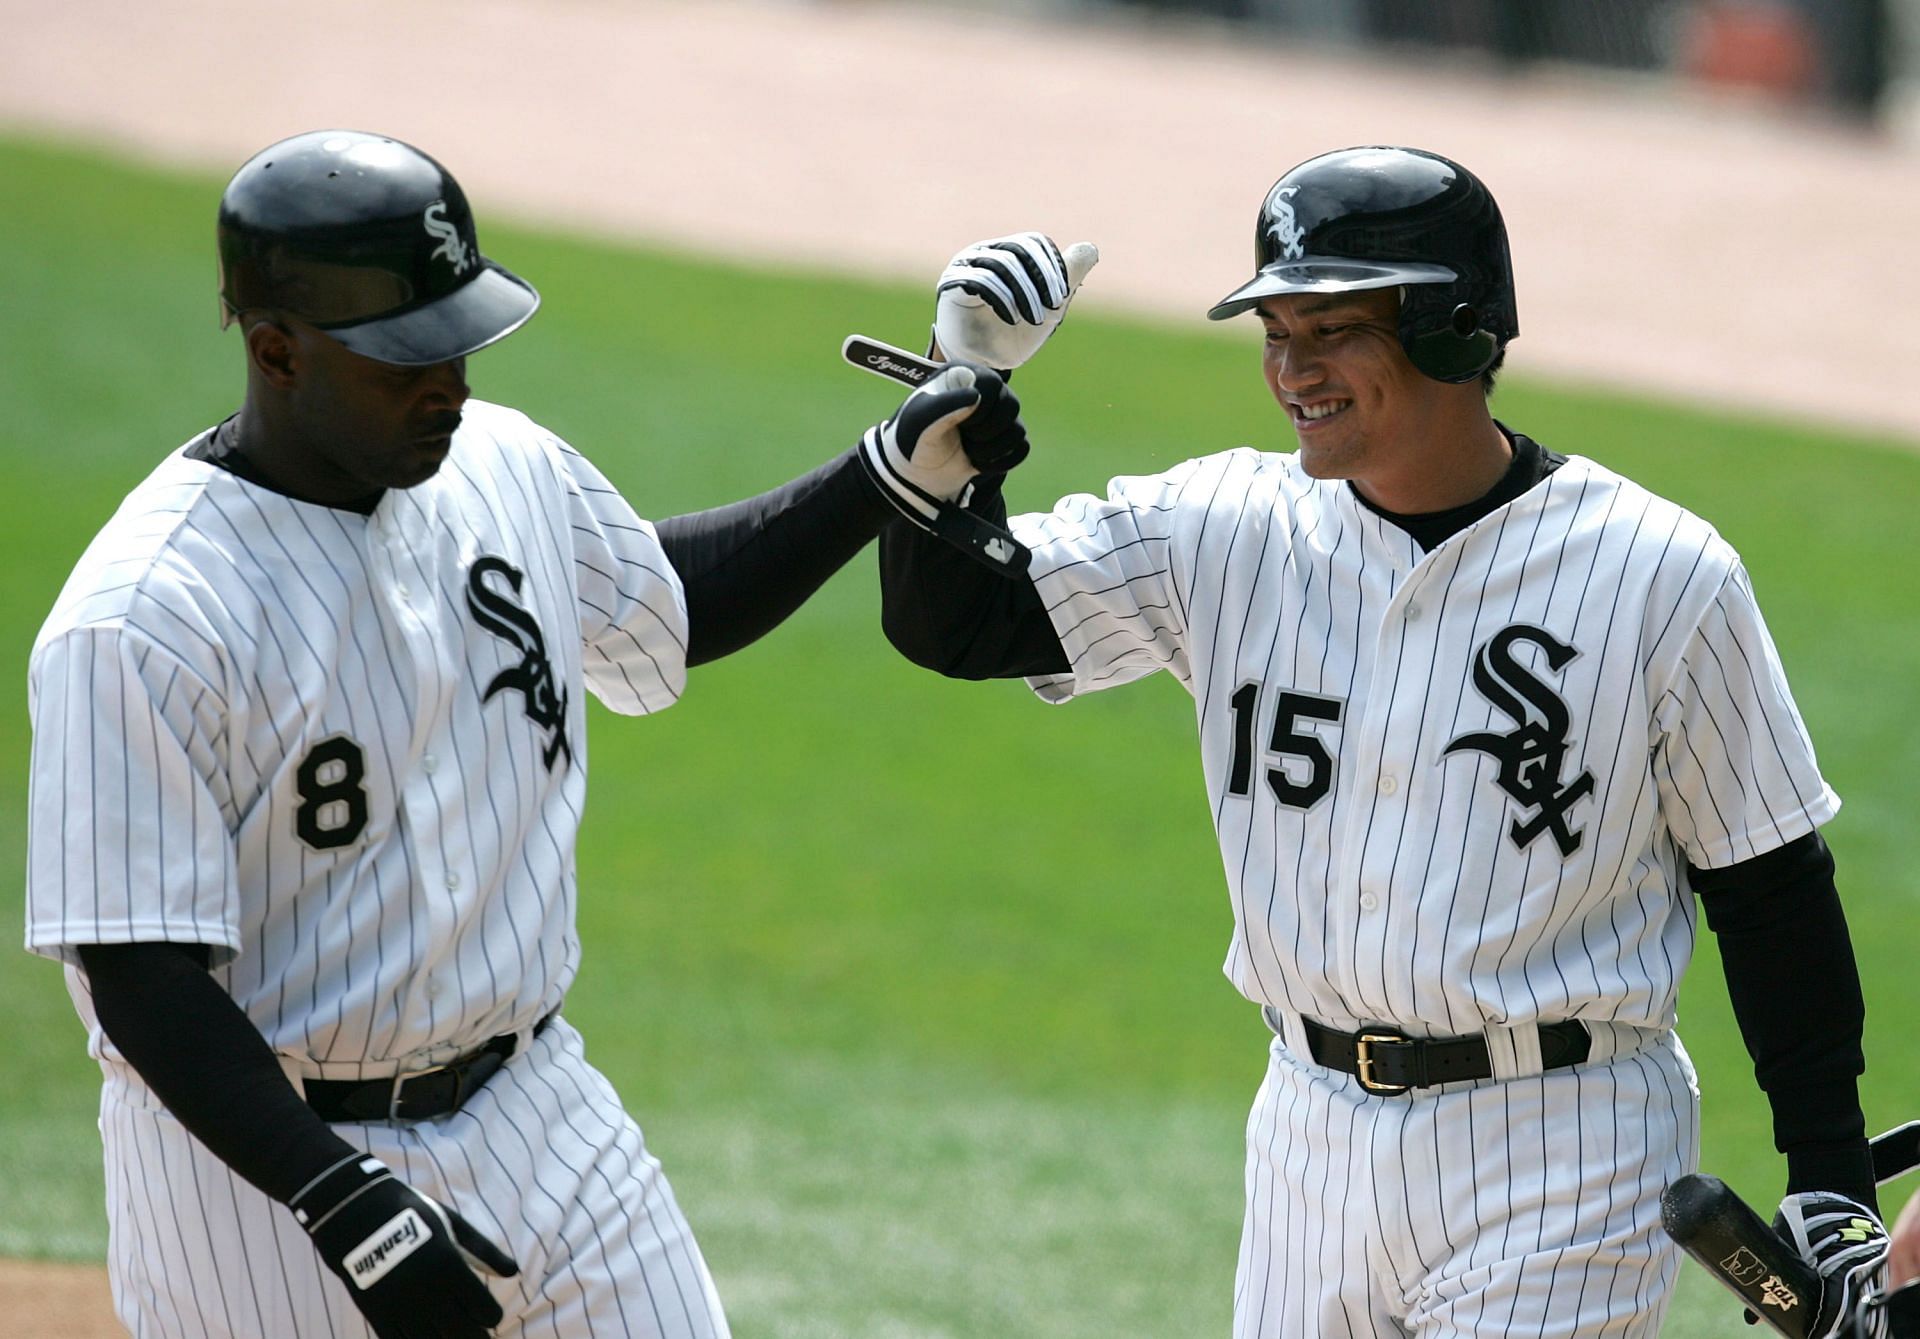 Cleveland Indians v Chicago White Sox: CHICAGO - APRIL 7: Tadahito Iguchi #15 of the Chicago White Sox congratulates teammate Carl Everett #8 after both players score in the first inning on a hit by teammate Paul Konerko against the Cleveland Indians on April 7, 2005 at U.S. Cellular Field in Chicago, Illinois. The Indians defeated the White Sox 11-5 in 11 innings. (Photo by Jonathan Daniel/Getty Images)